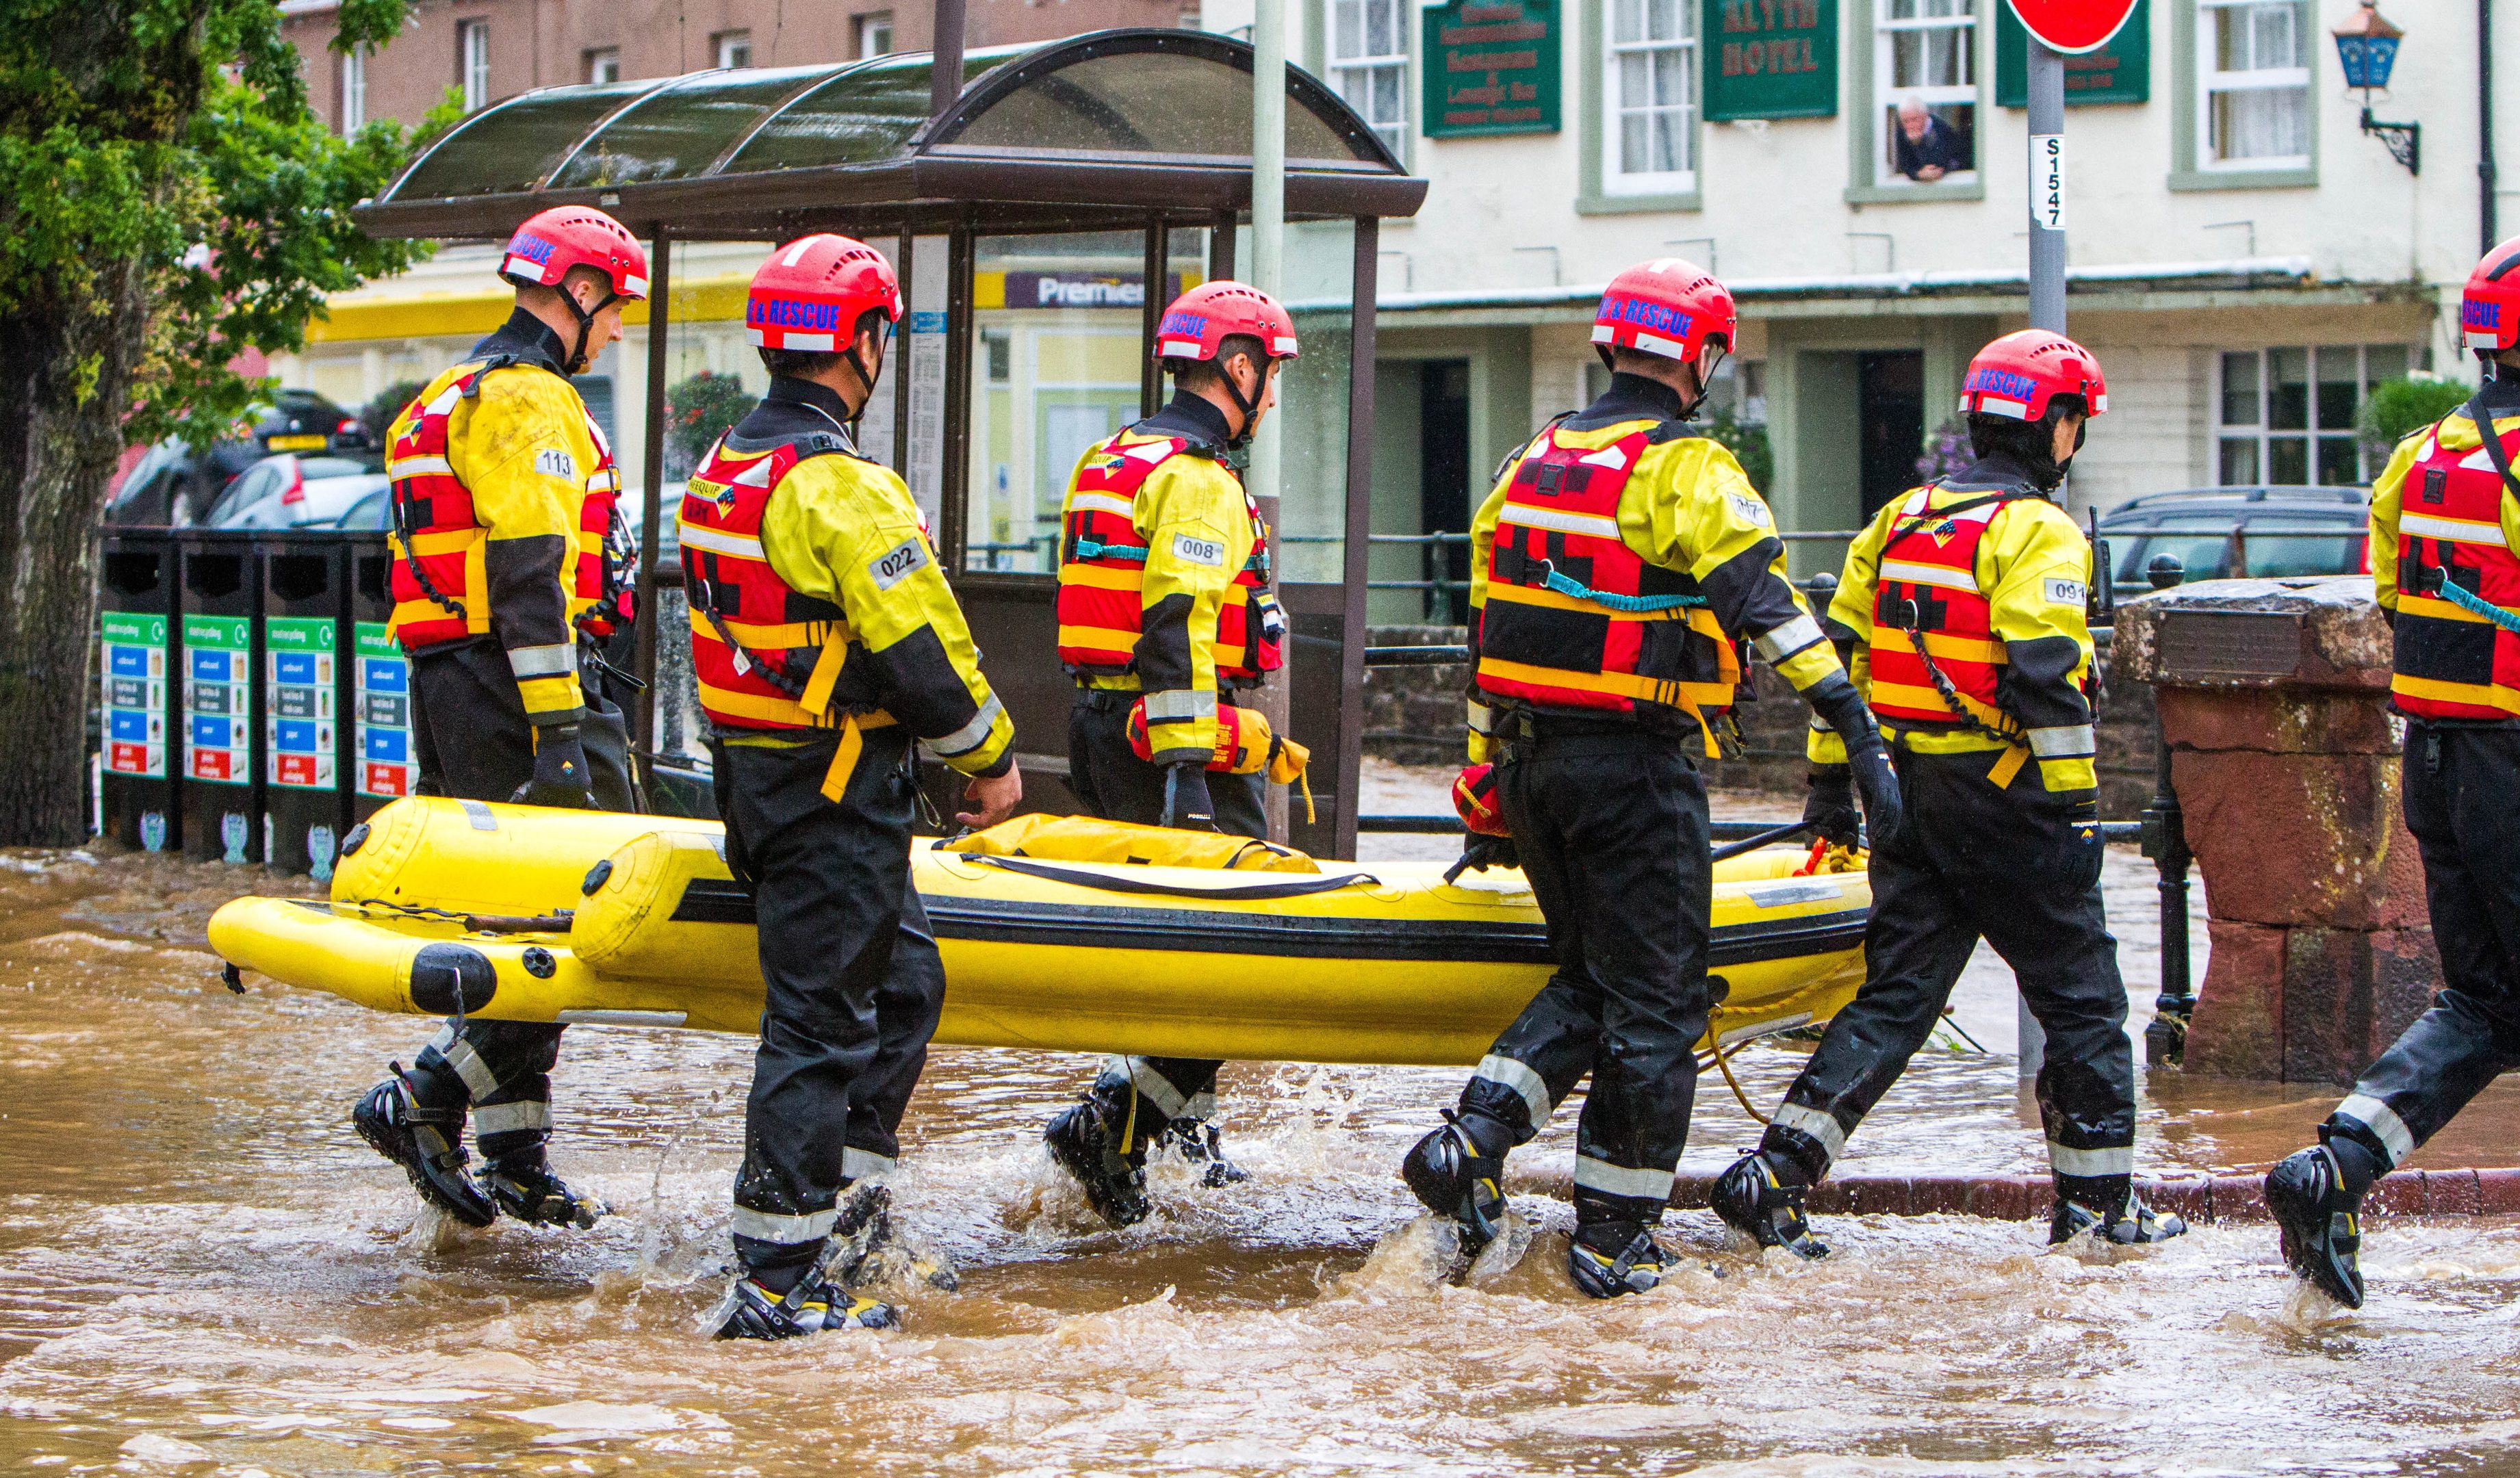 The rescue operation in Alyth on July 17, 2015.